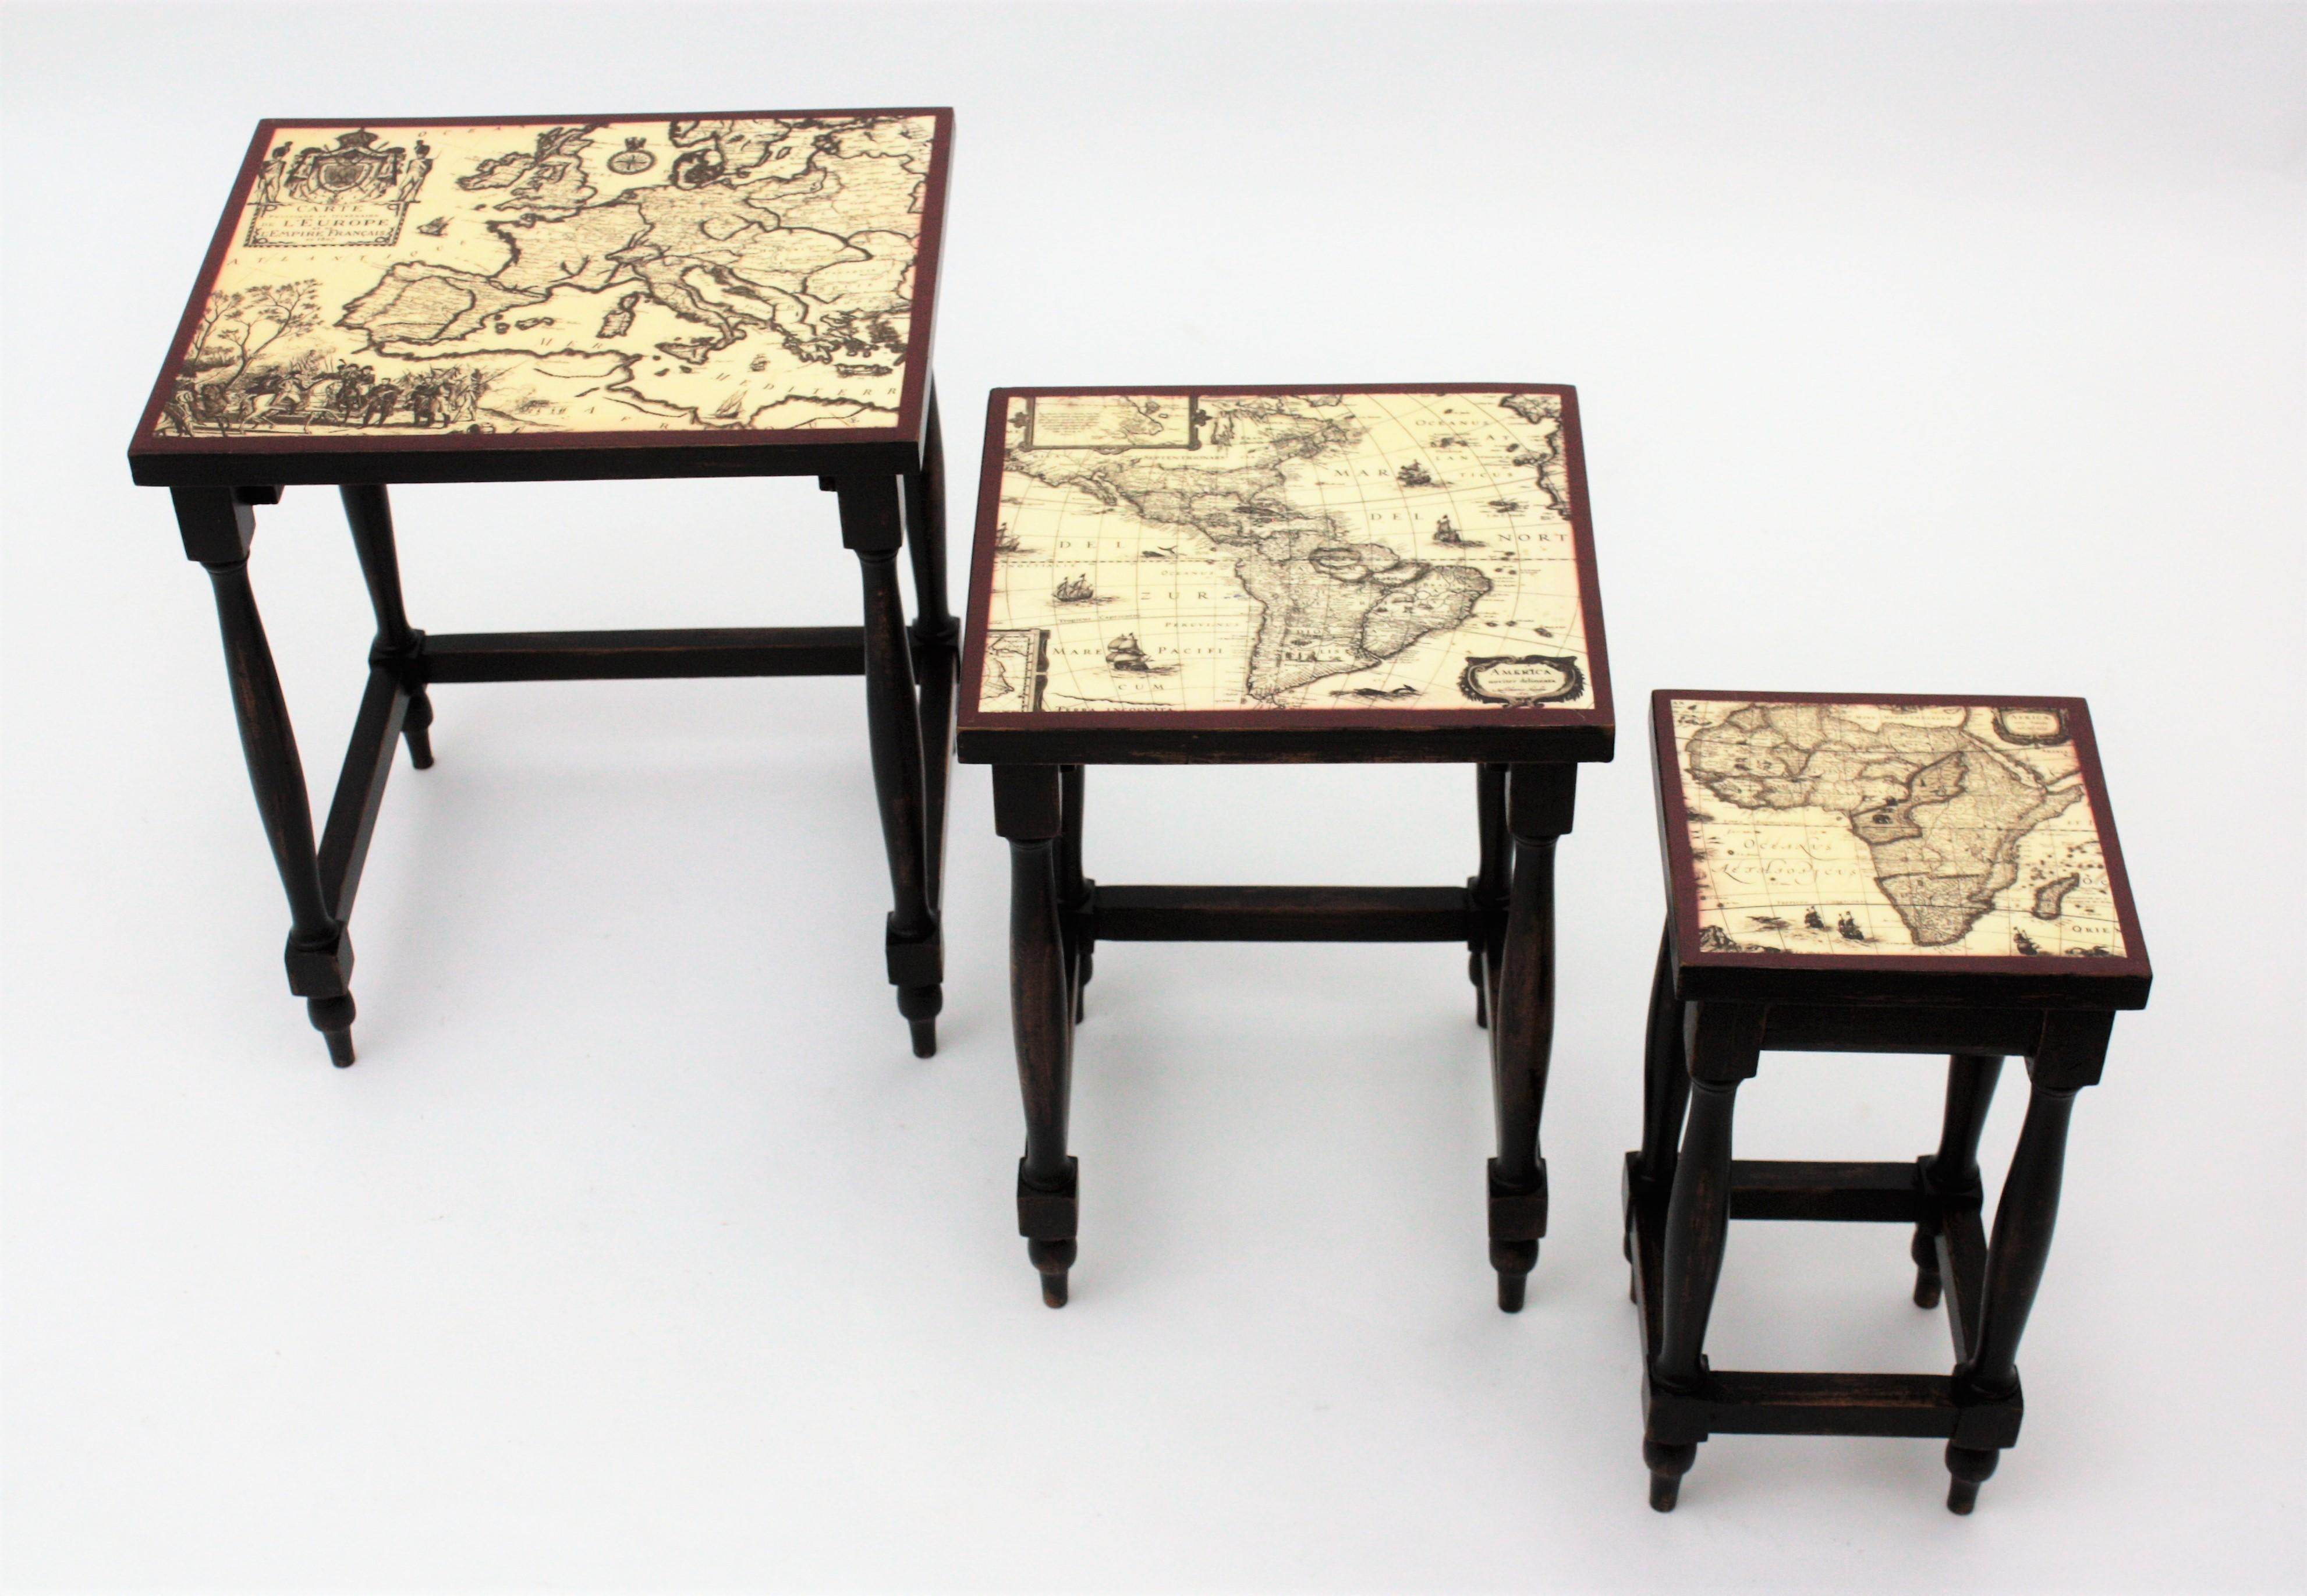 French Nesting Tables in Wood with Maps Tops, 1940s For Sale 3